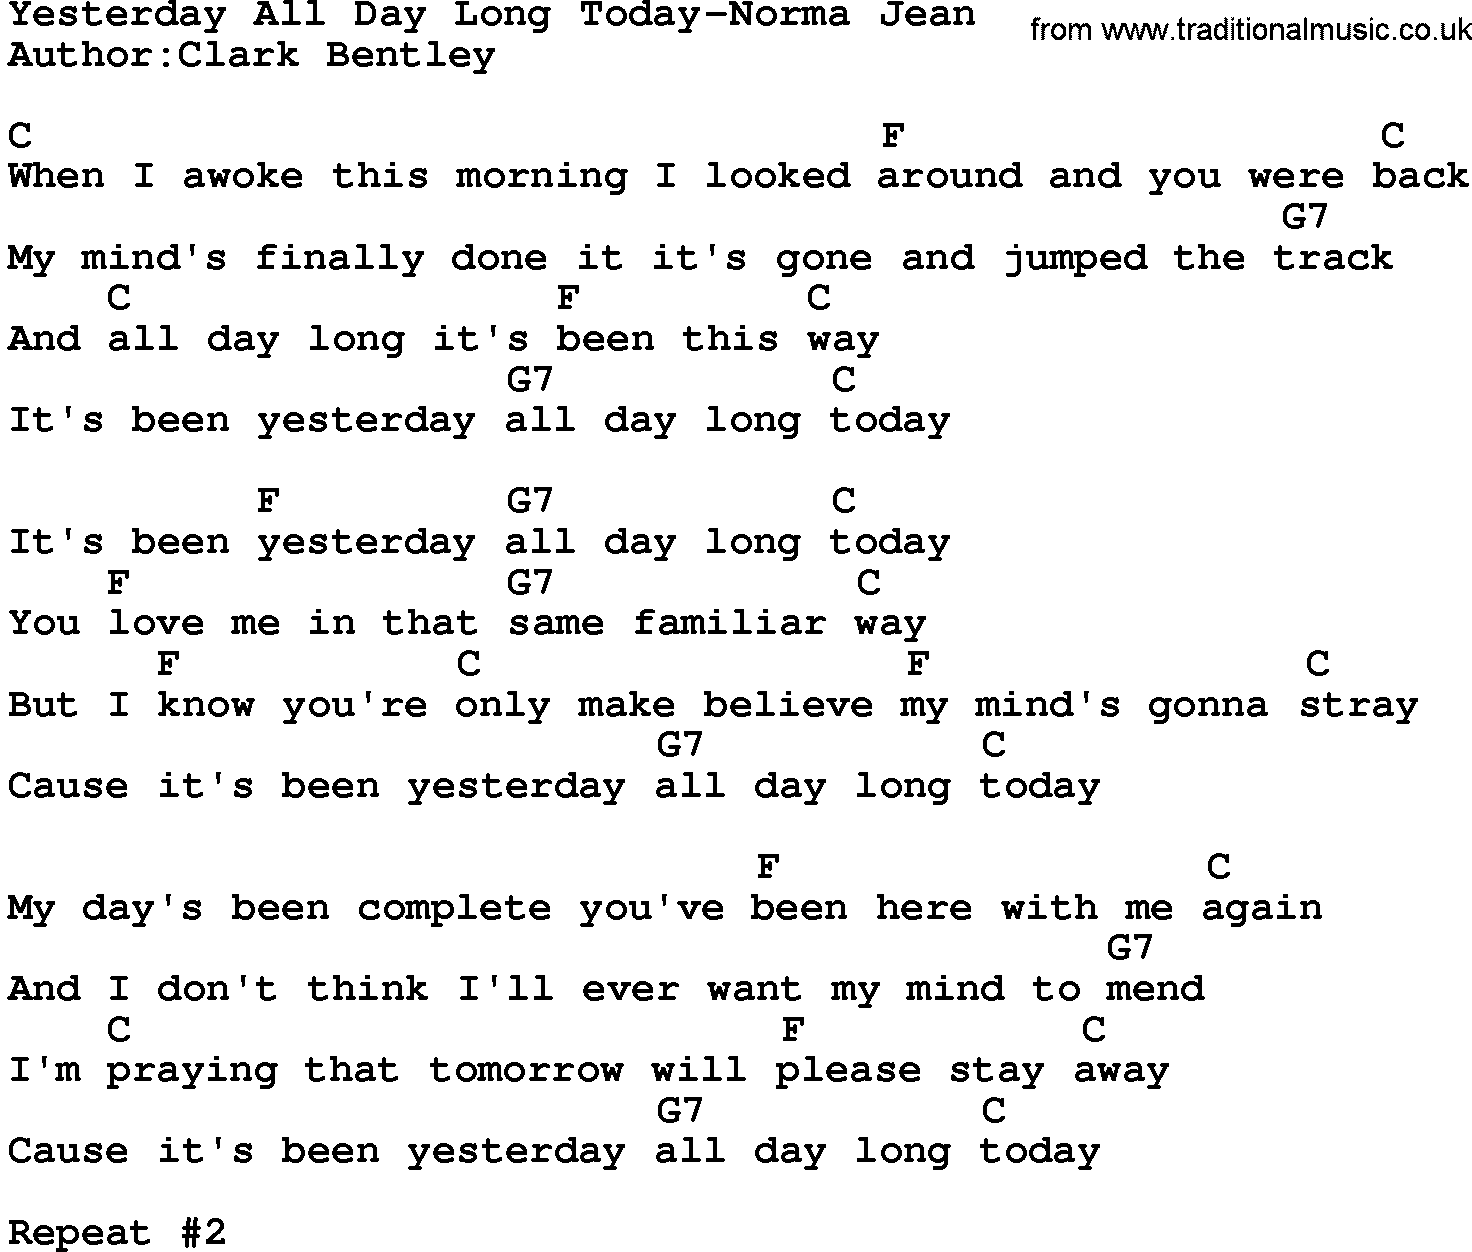 Country music song: Yesterday All Day Long Today-Norma Jean lyrics and chords